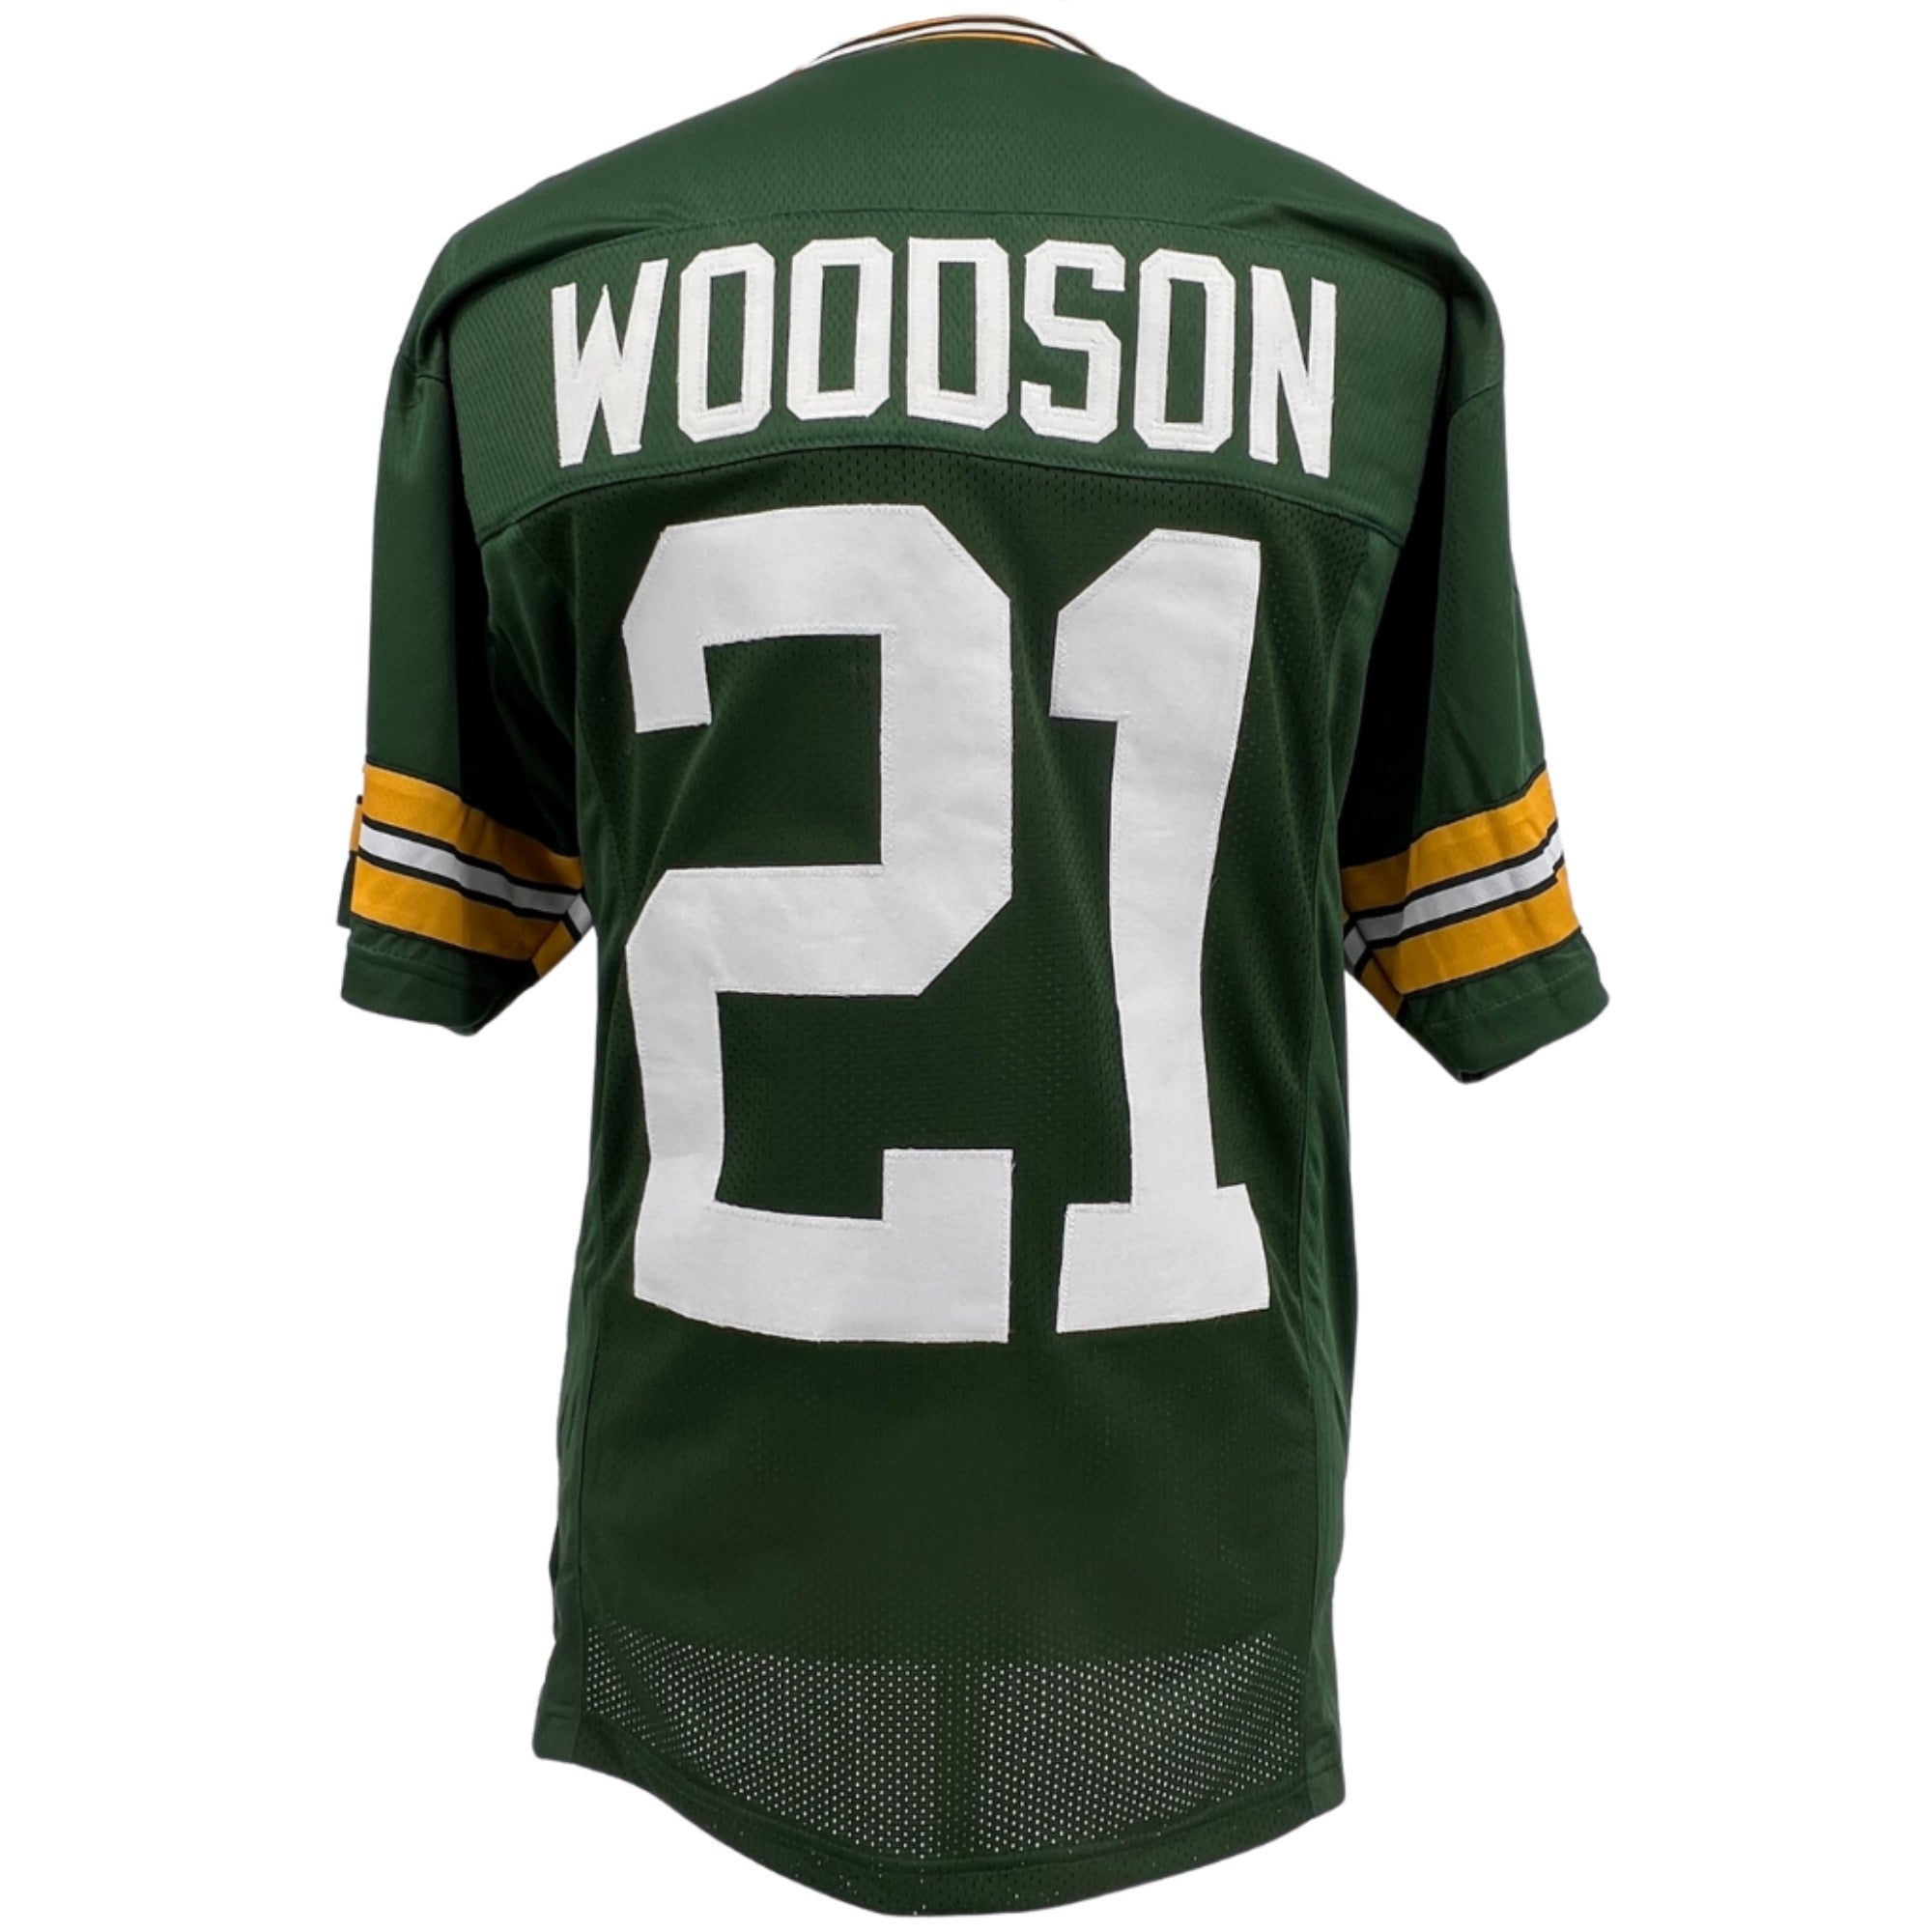 CHARLES WOODSON Packers GREEN Jersey M-5XL Unsigned Custom Sewn Stitched